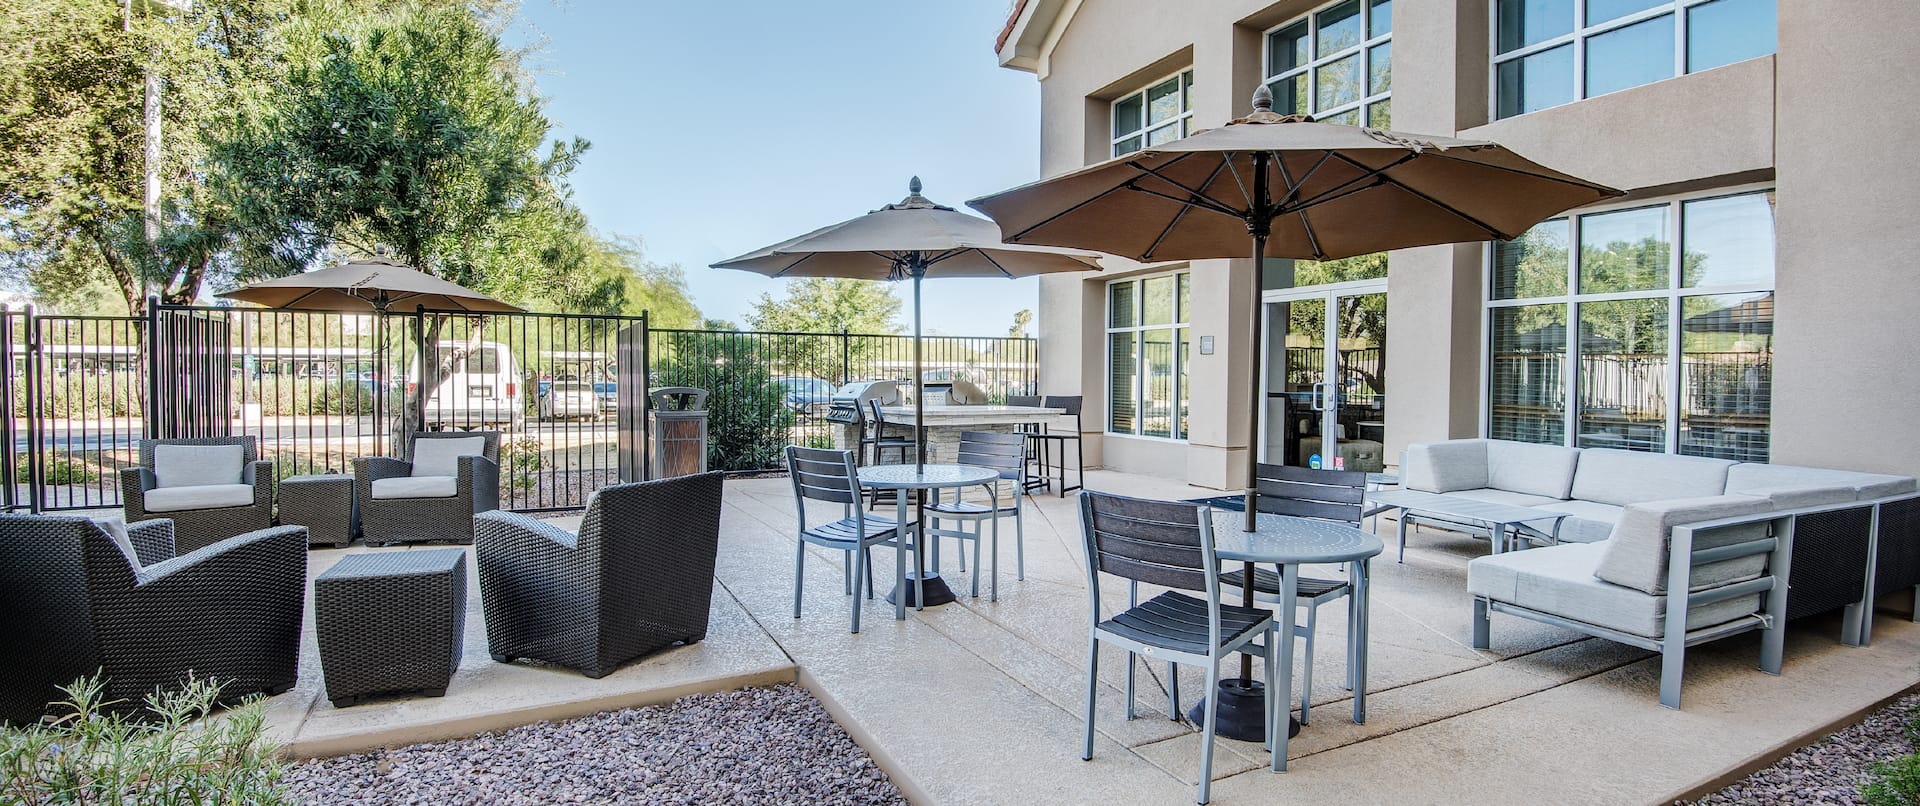 Patio with Grill and Seating Area